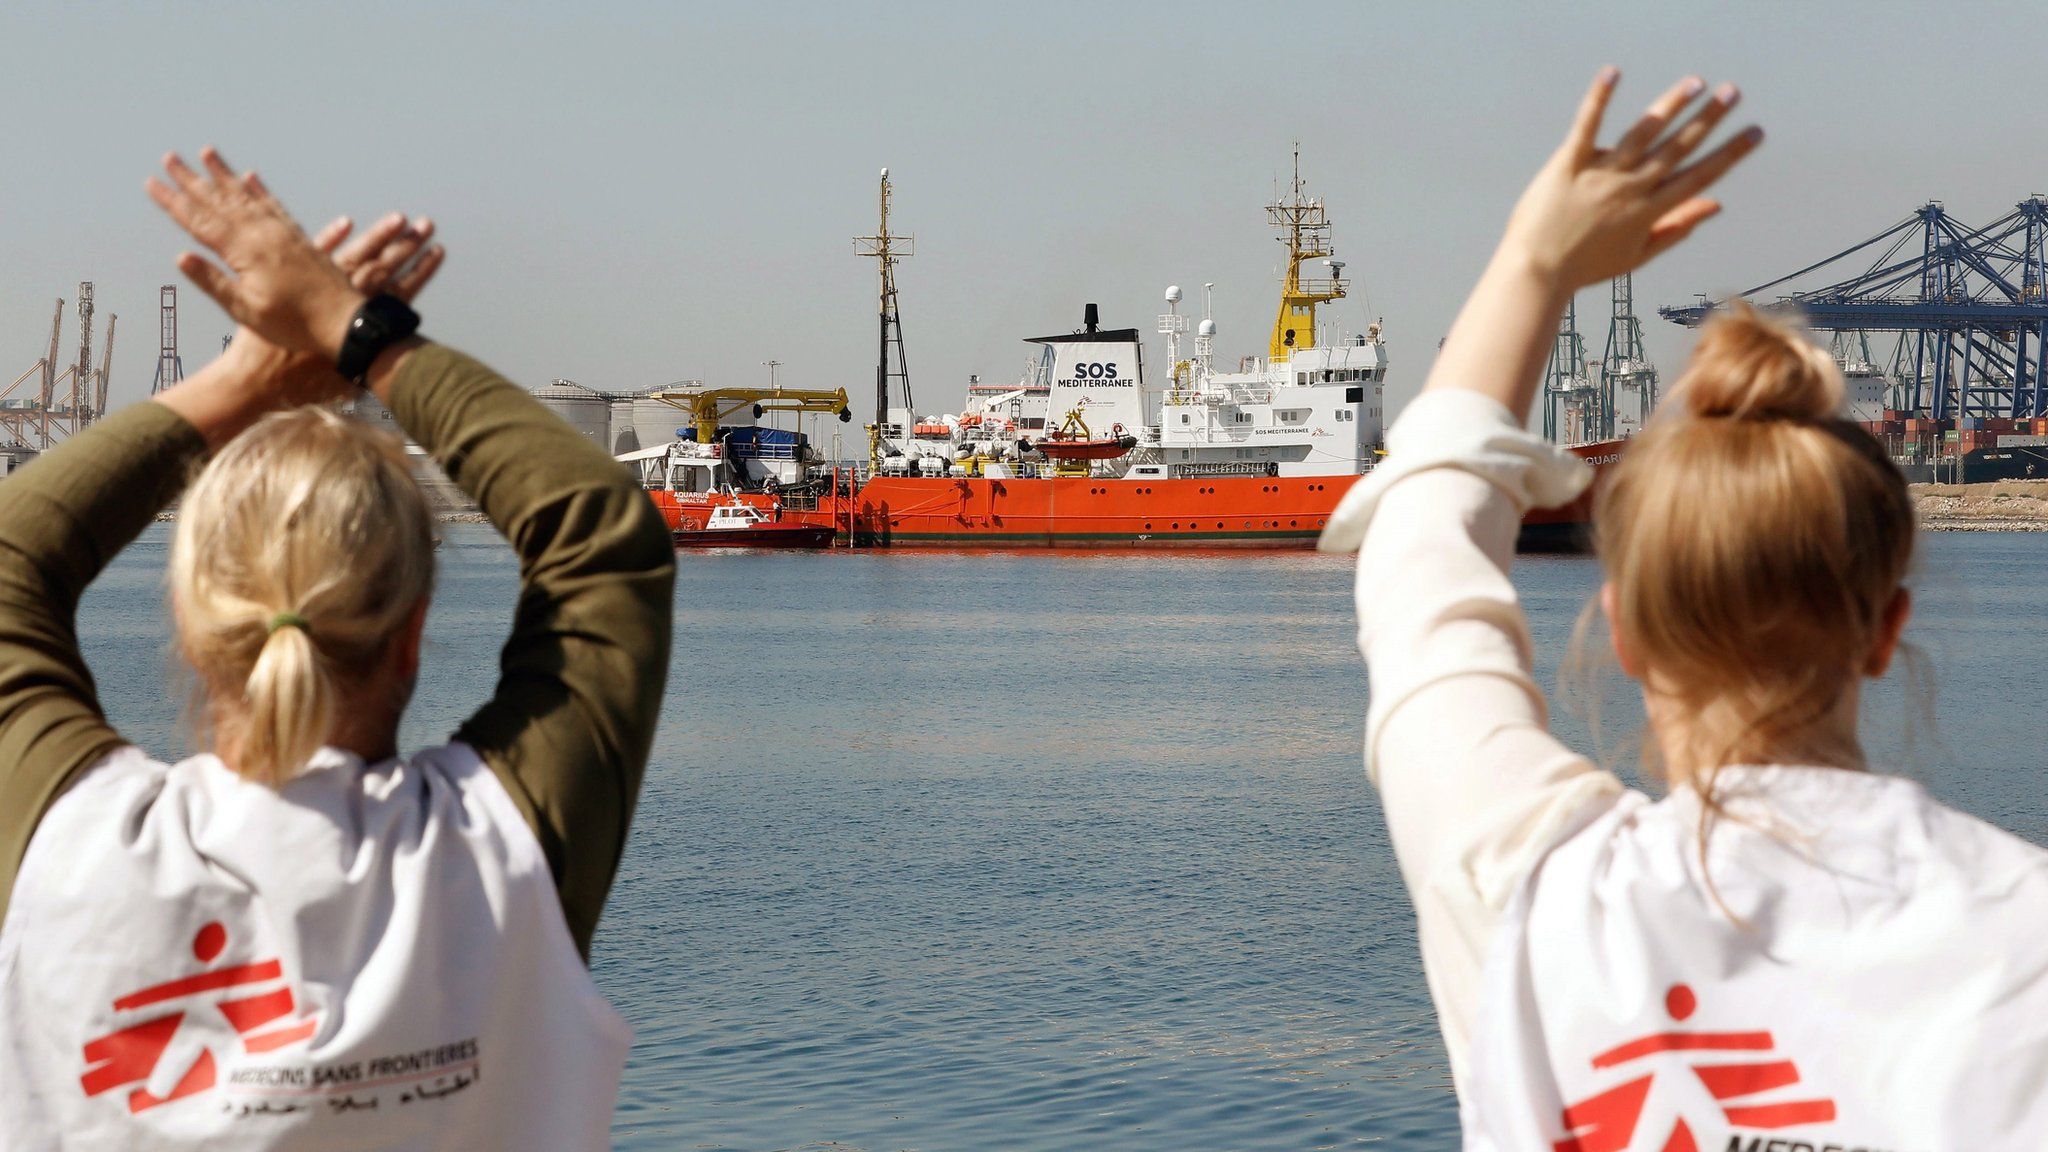 Aid workers welcome the Aquarius as it arrives in Valencia - 17 June